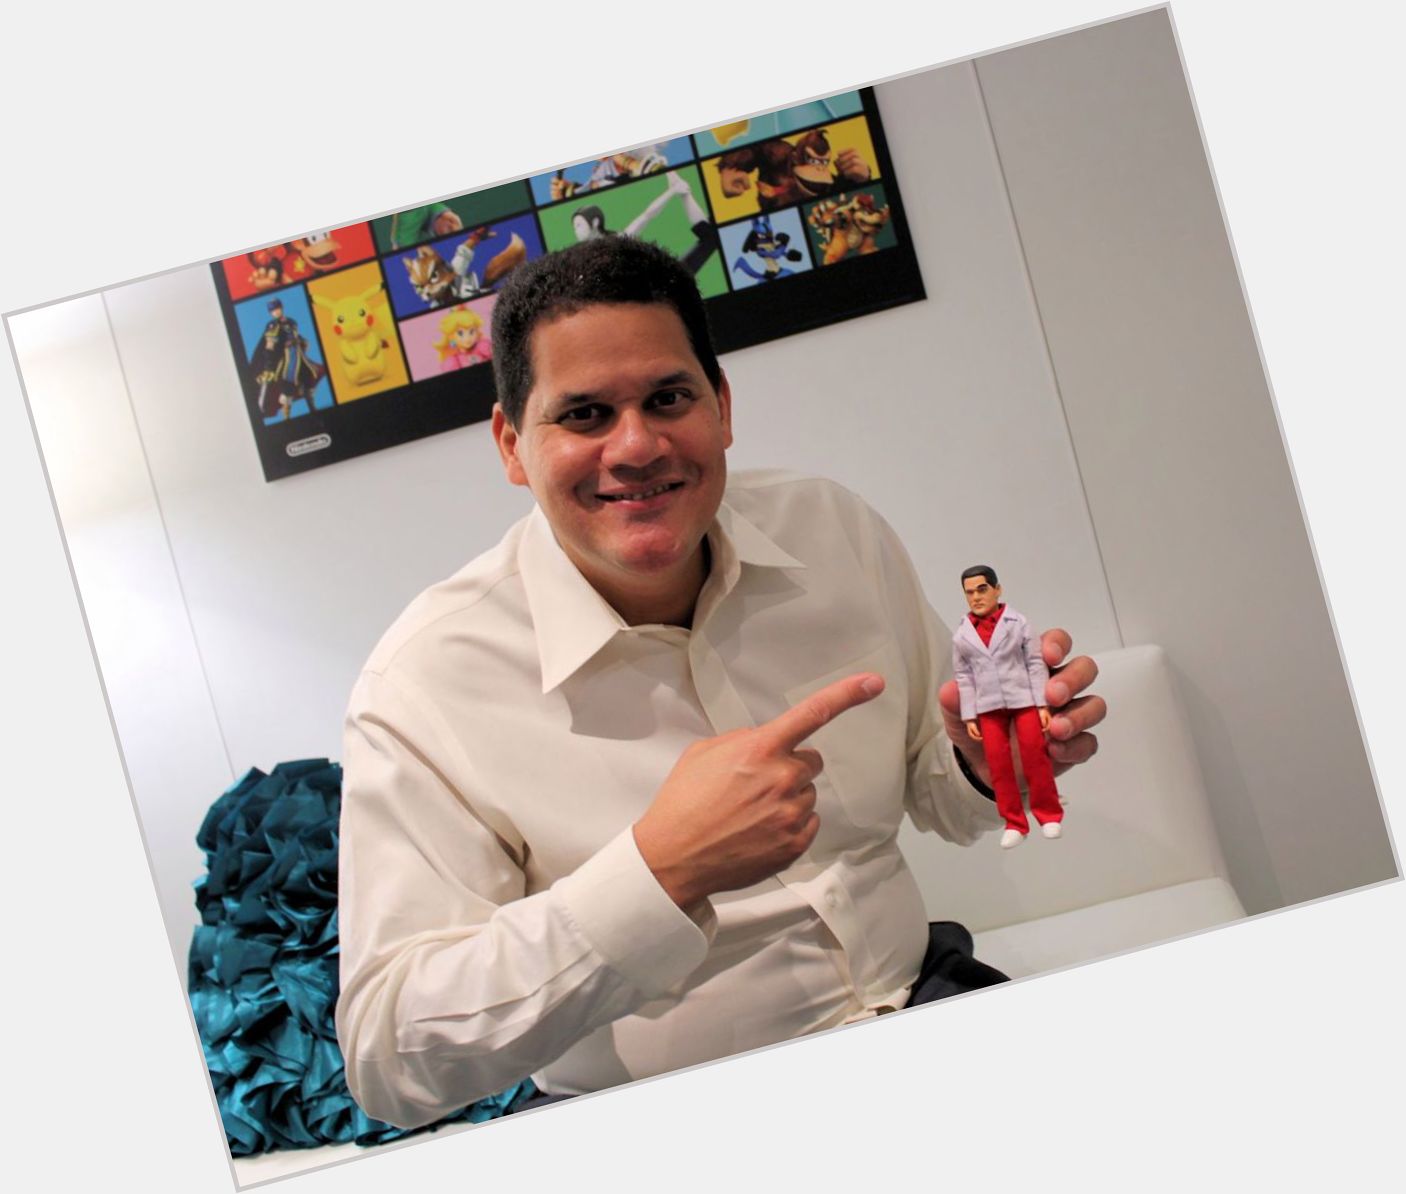 Happy 54th birthday to Reggie Fils-Aimé. 50 years older than the 3DS yet still going strong! :) 